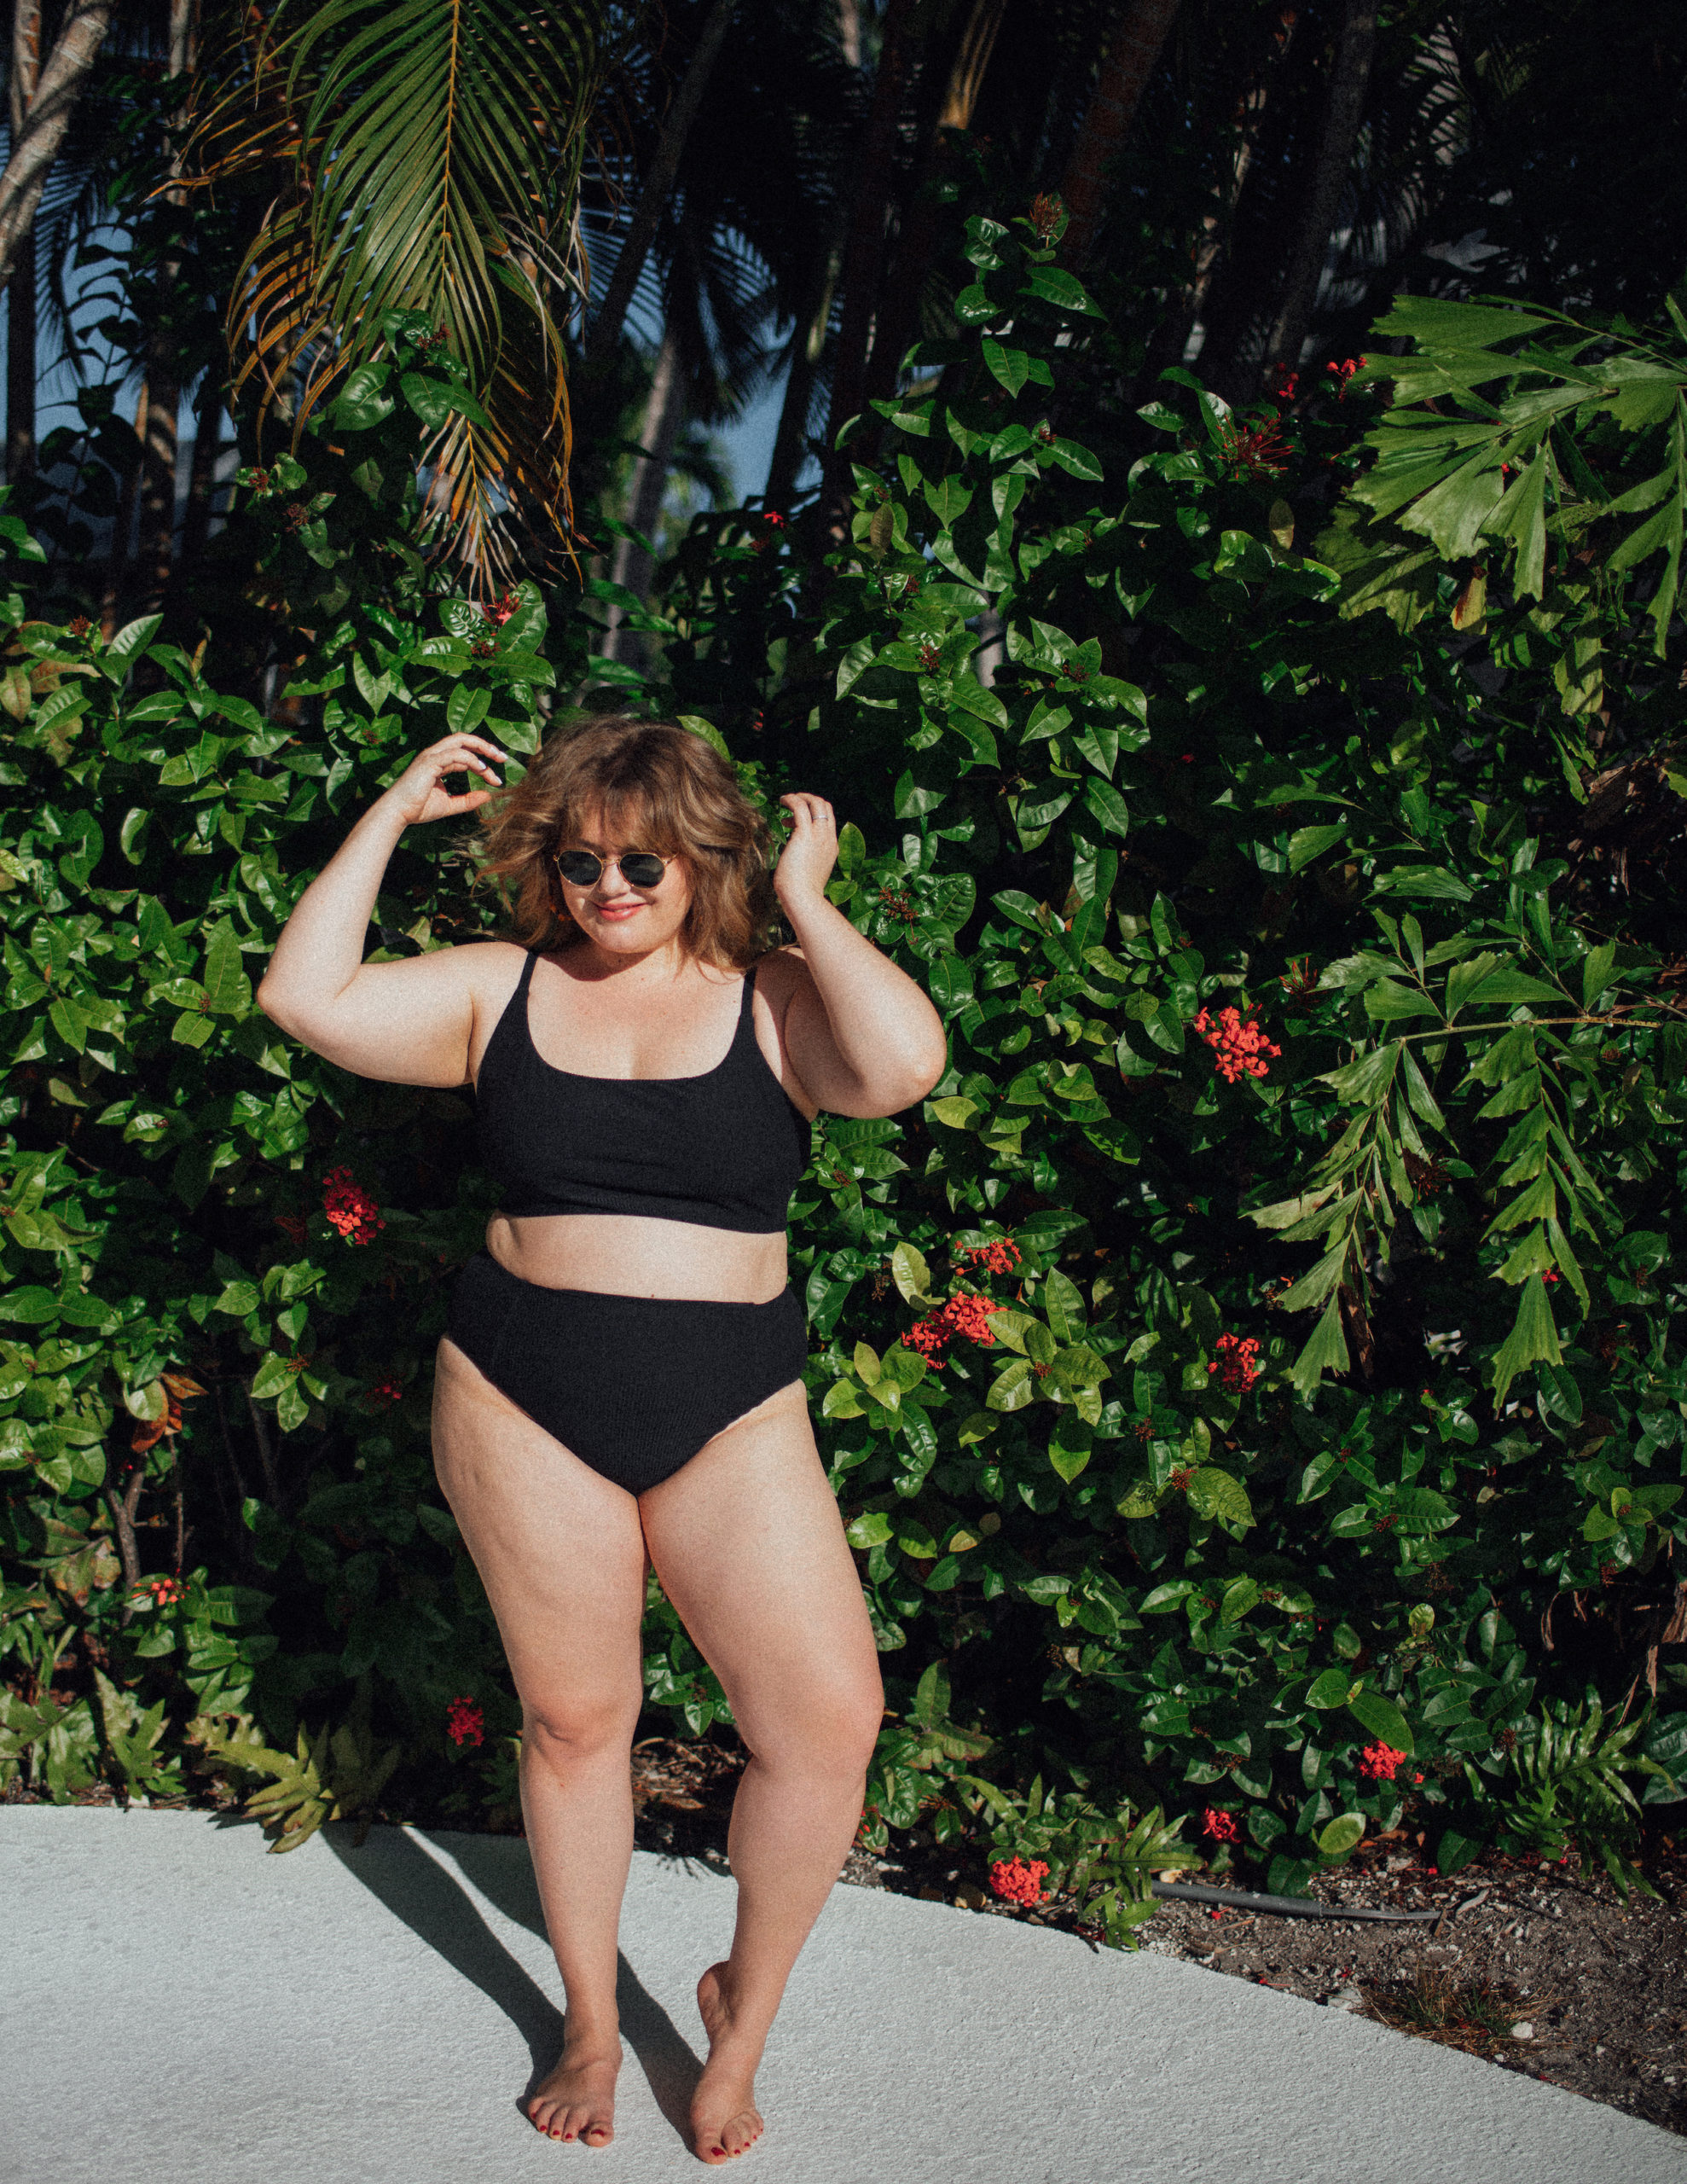 Sharing a plus size black bikini from Andie Swim. Black bikinis are great because they are so versatile for the summer months! 